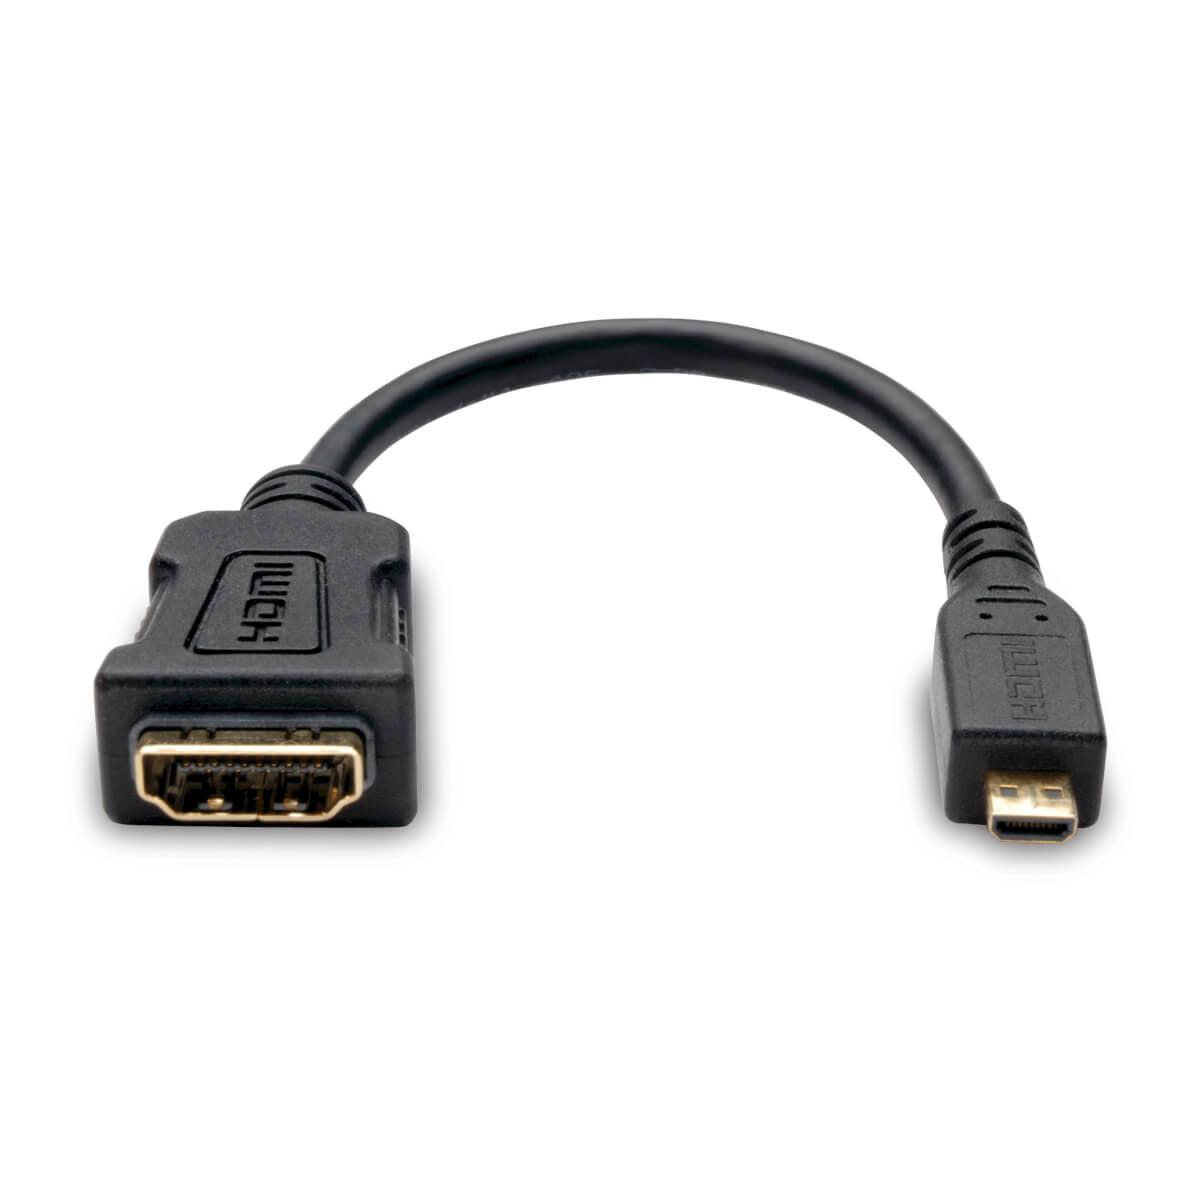 Tripp Lite P142-06N-Micro Micro Hdmi To Hdmi Adapter For Ultrabook/Laptop/Desktop Pc - (Type D M/F), 6 In. (15.2 Cm)